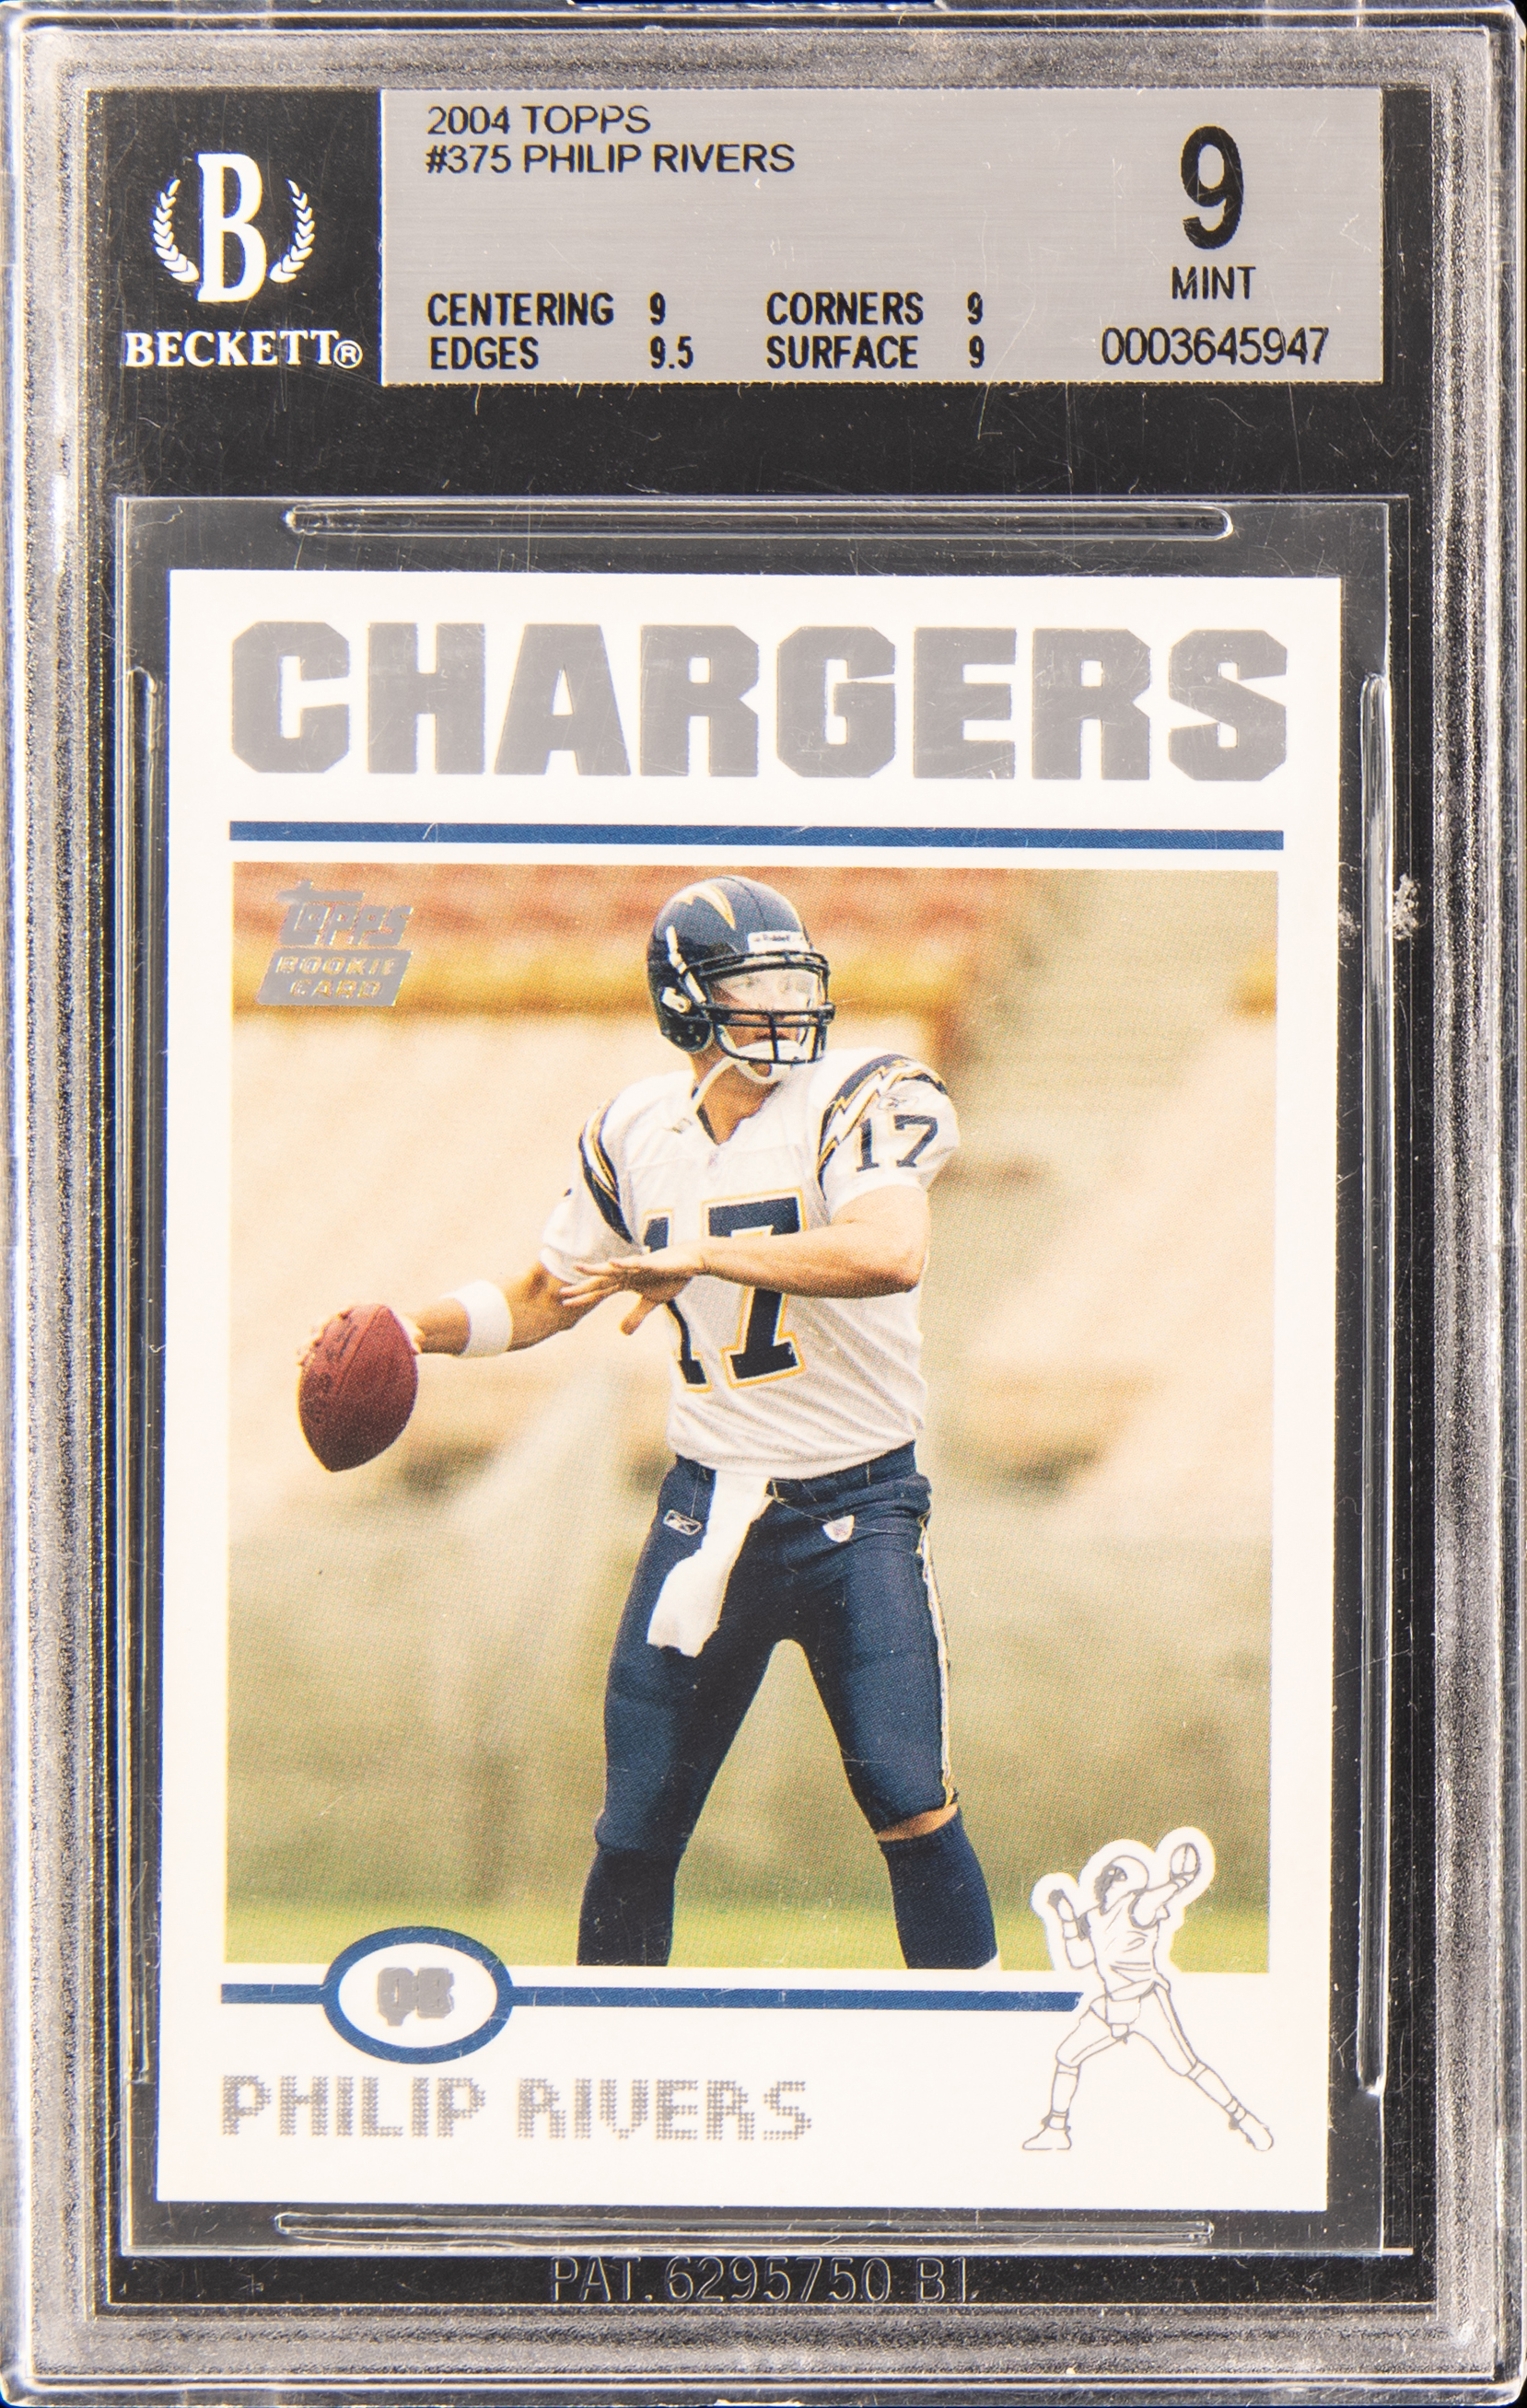 2004 Topps Null 375 Philip Rivers – BGS MINT 9